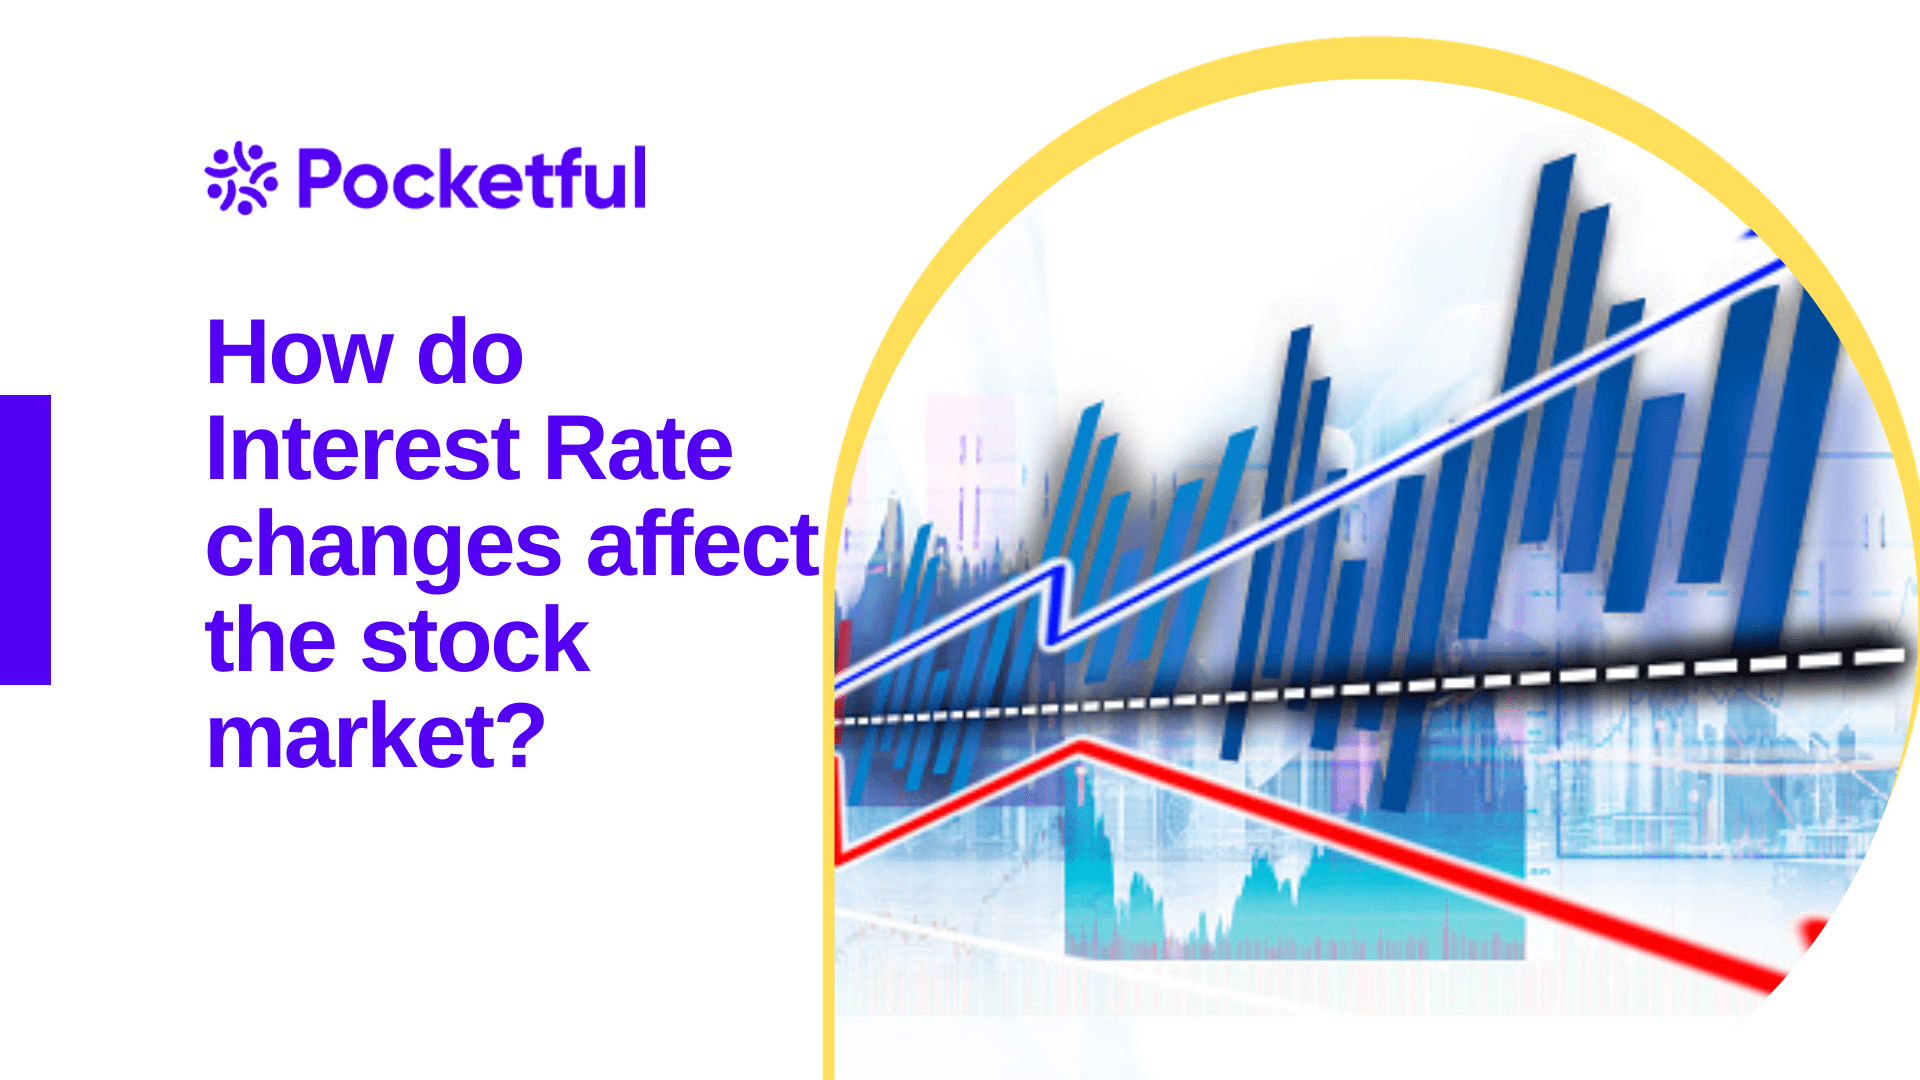 How Interest Rate Changes Affect the Stock Market